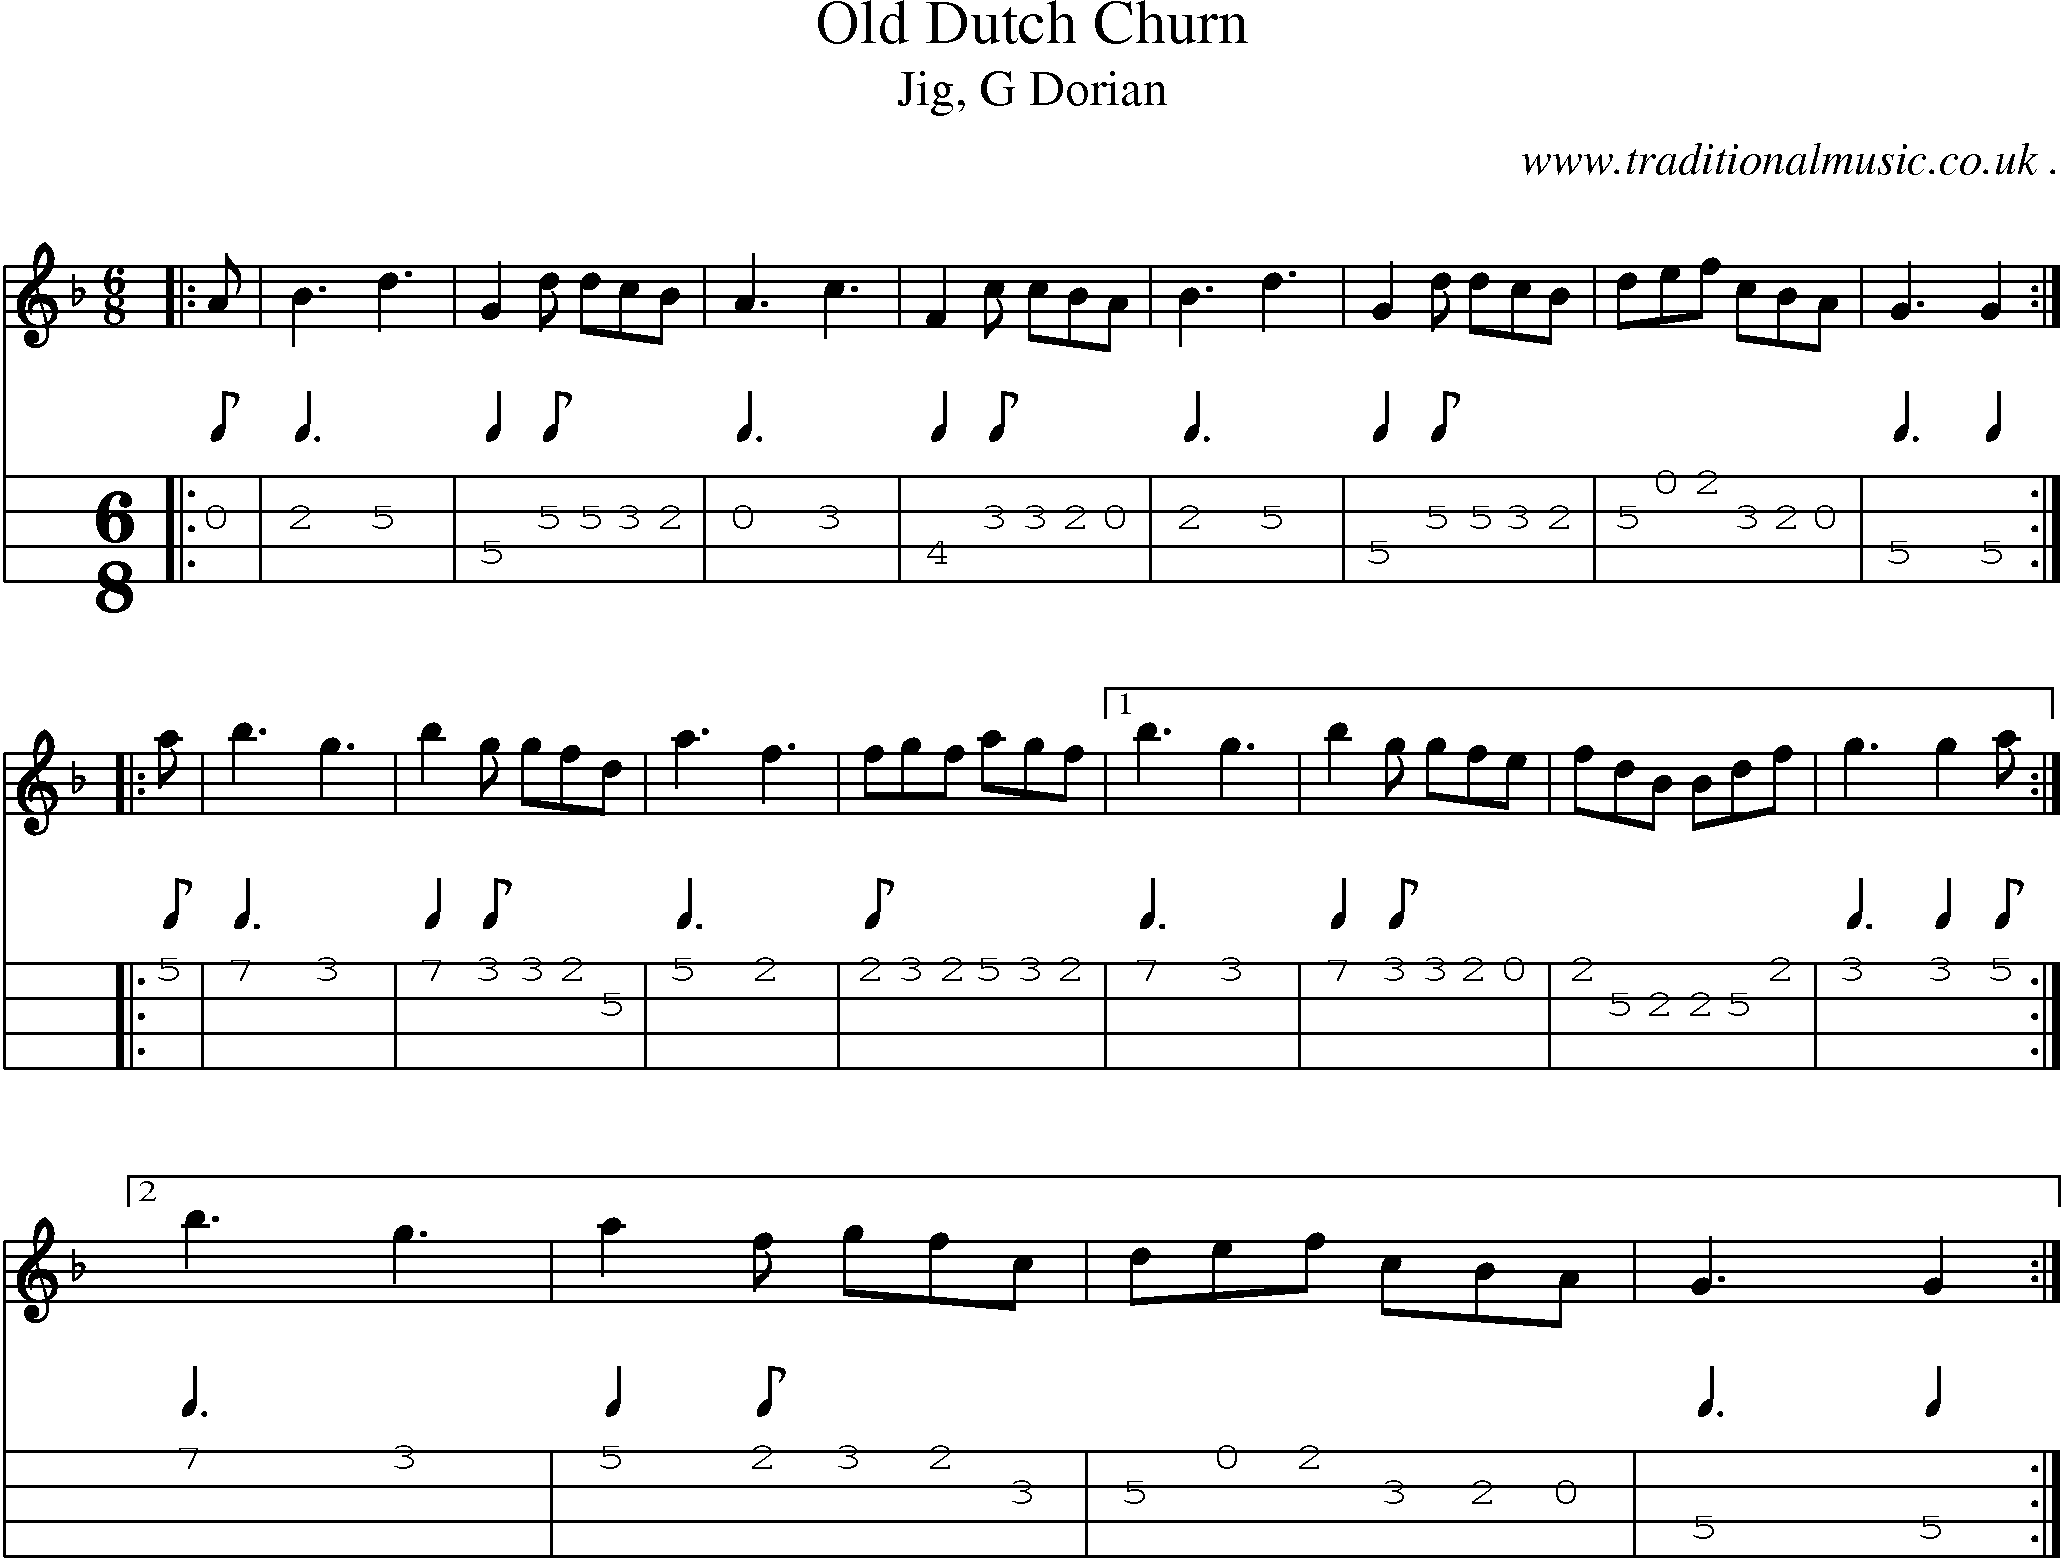 Sheet-music  score, Chords and Mandolin Tabs for Old Dutch Churn